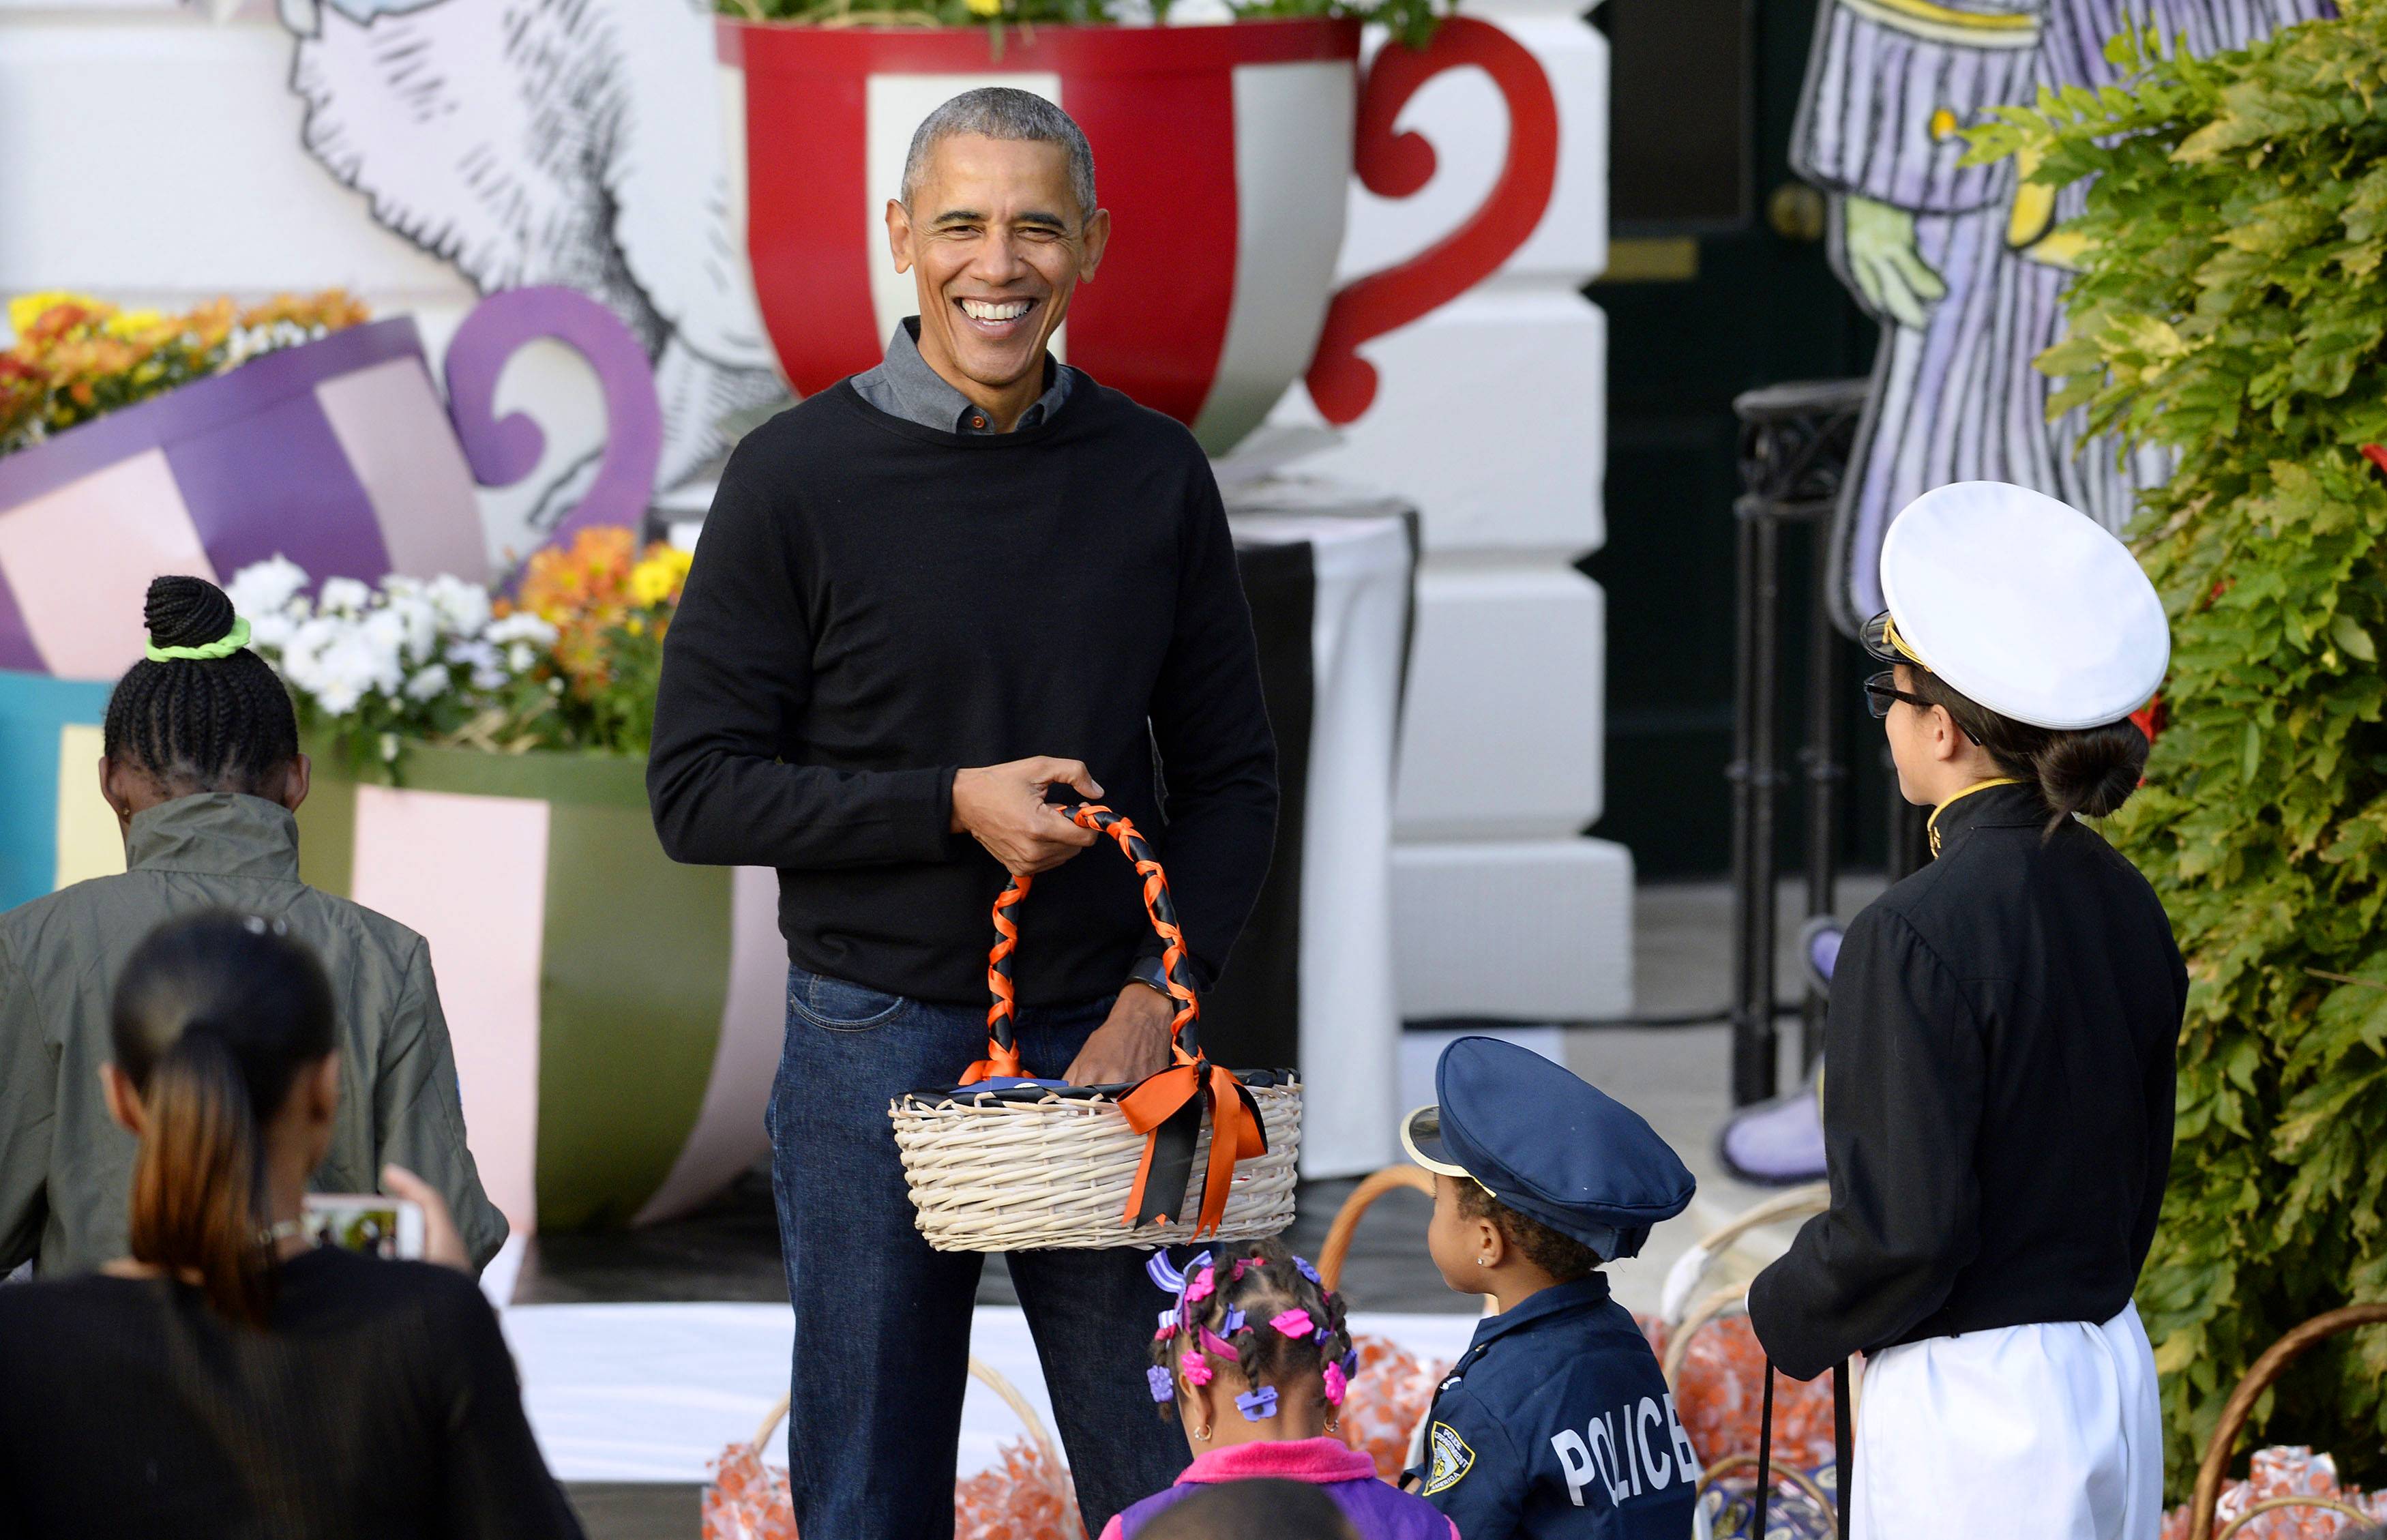 BET News: The Obamas Celebrate Halloween at the White House